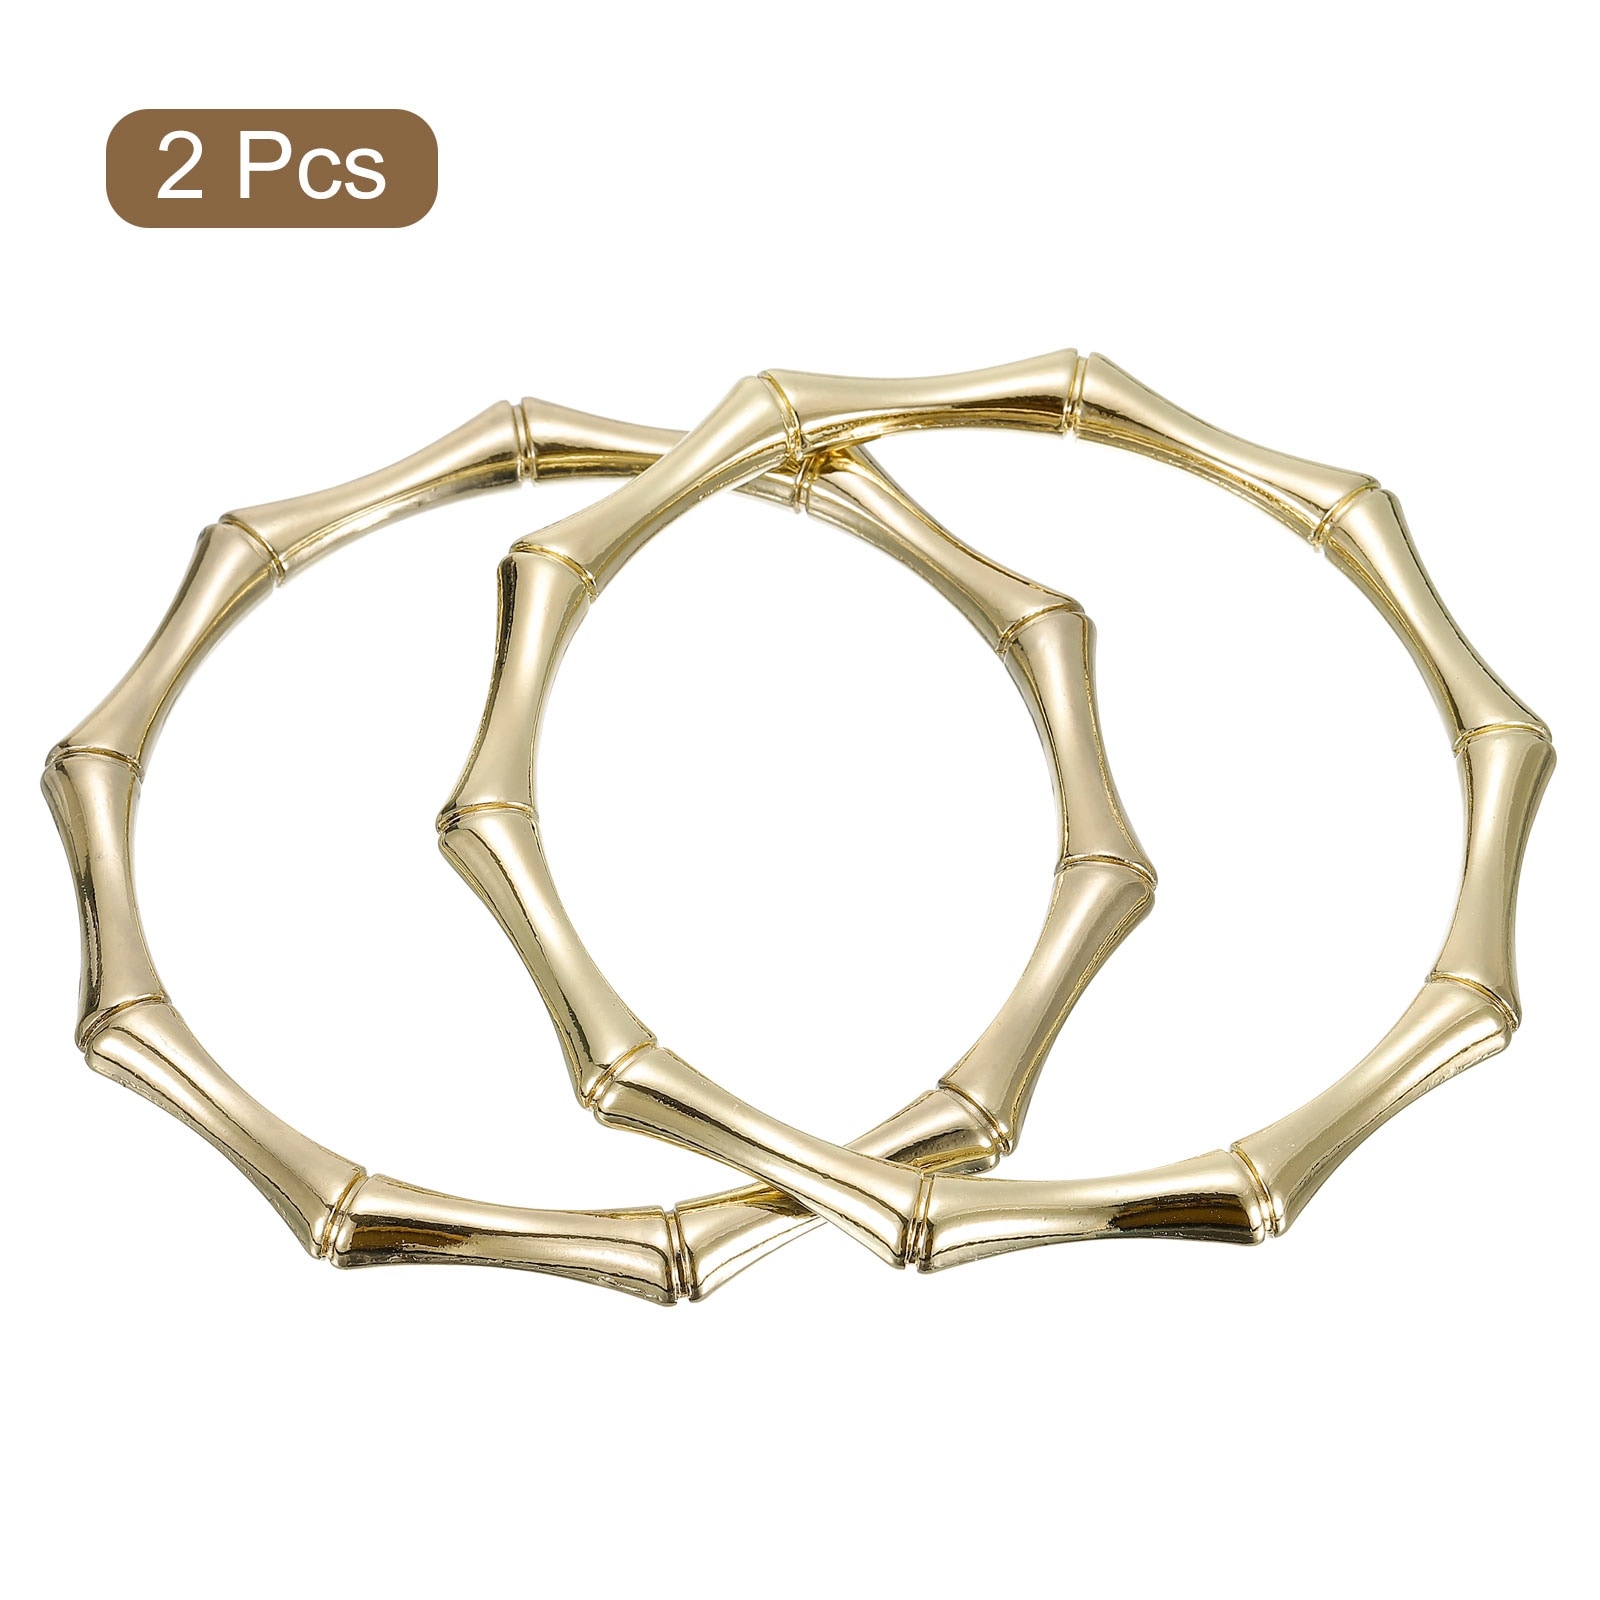 1 Pair Metal Round Shaped Handles Replacement for Handmade Bag Handbags  Purse Handles(Gold) : Amazon.in: Shoes & Handbags